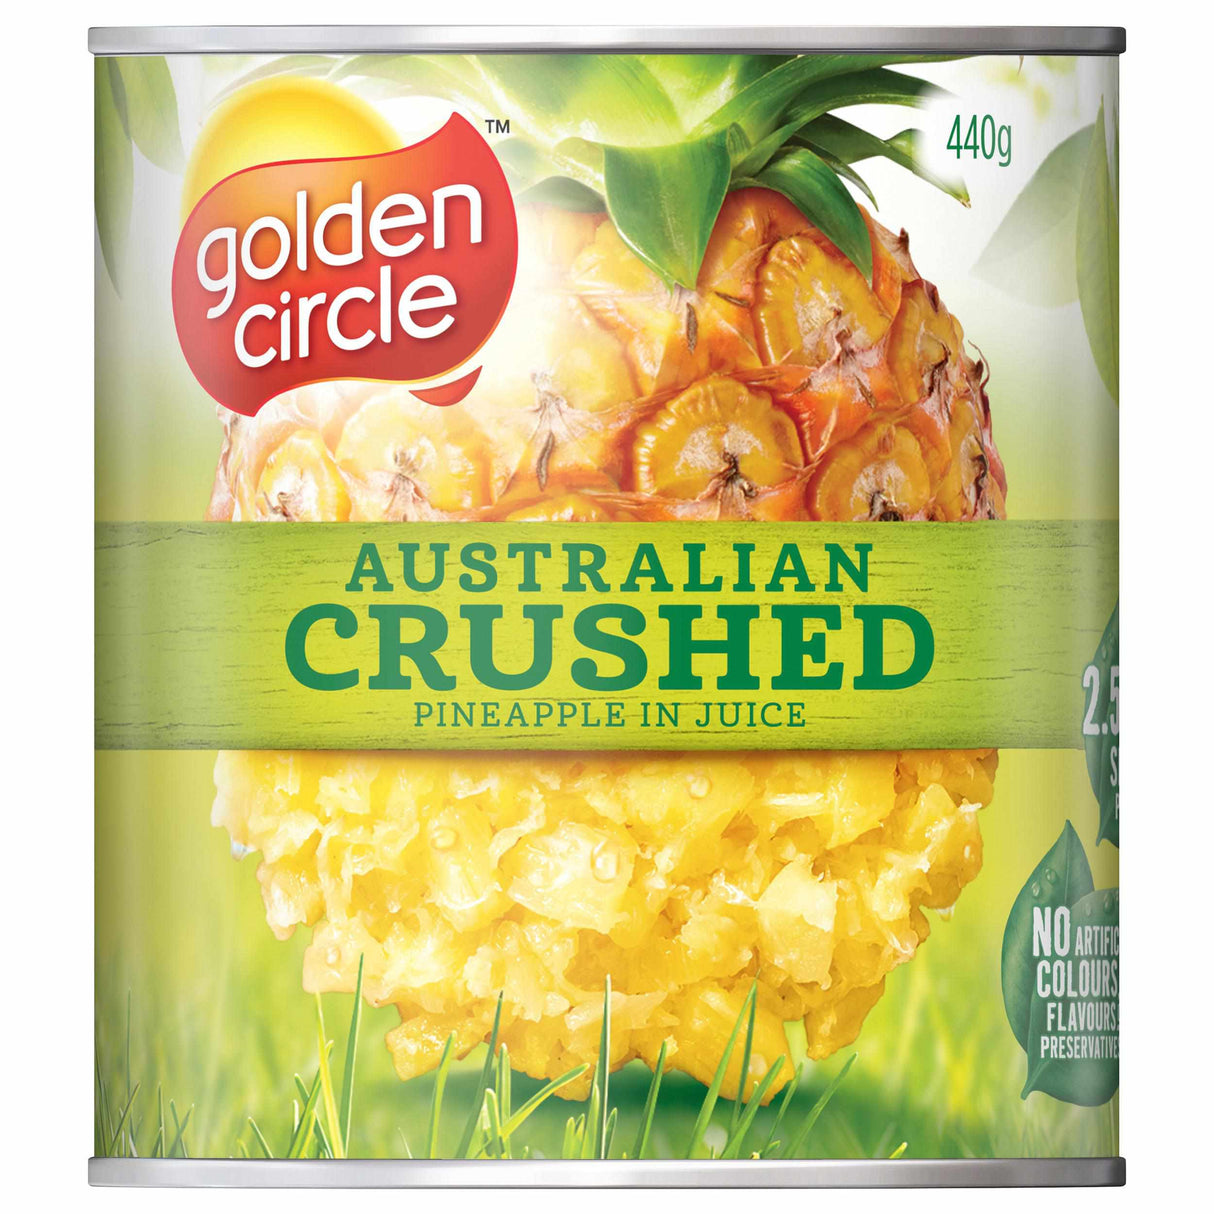 Golden Circle Crushed Pineapple in Juice 440g